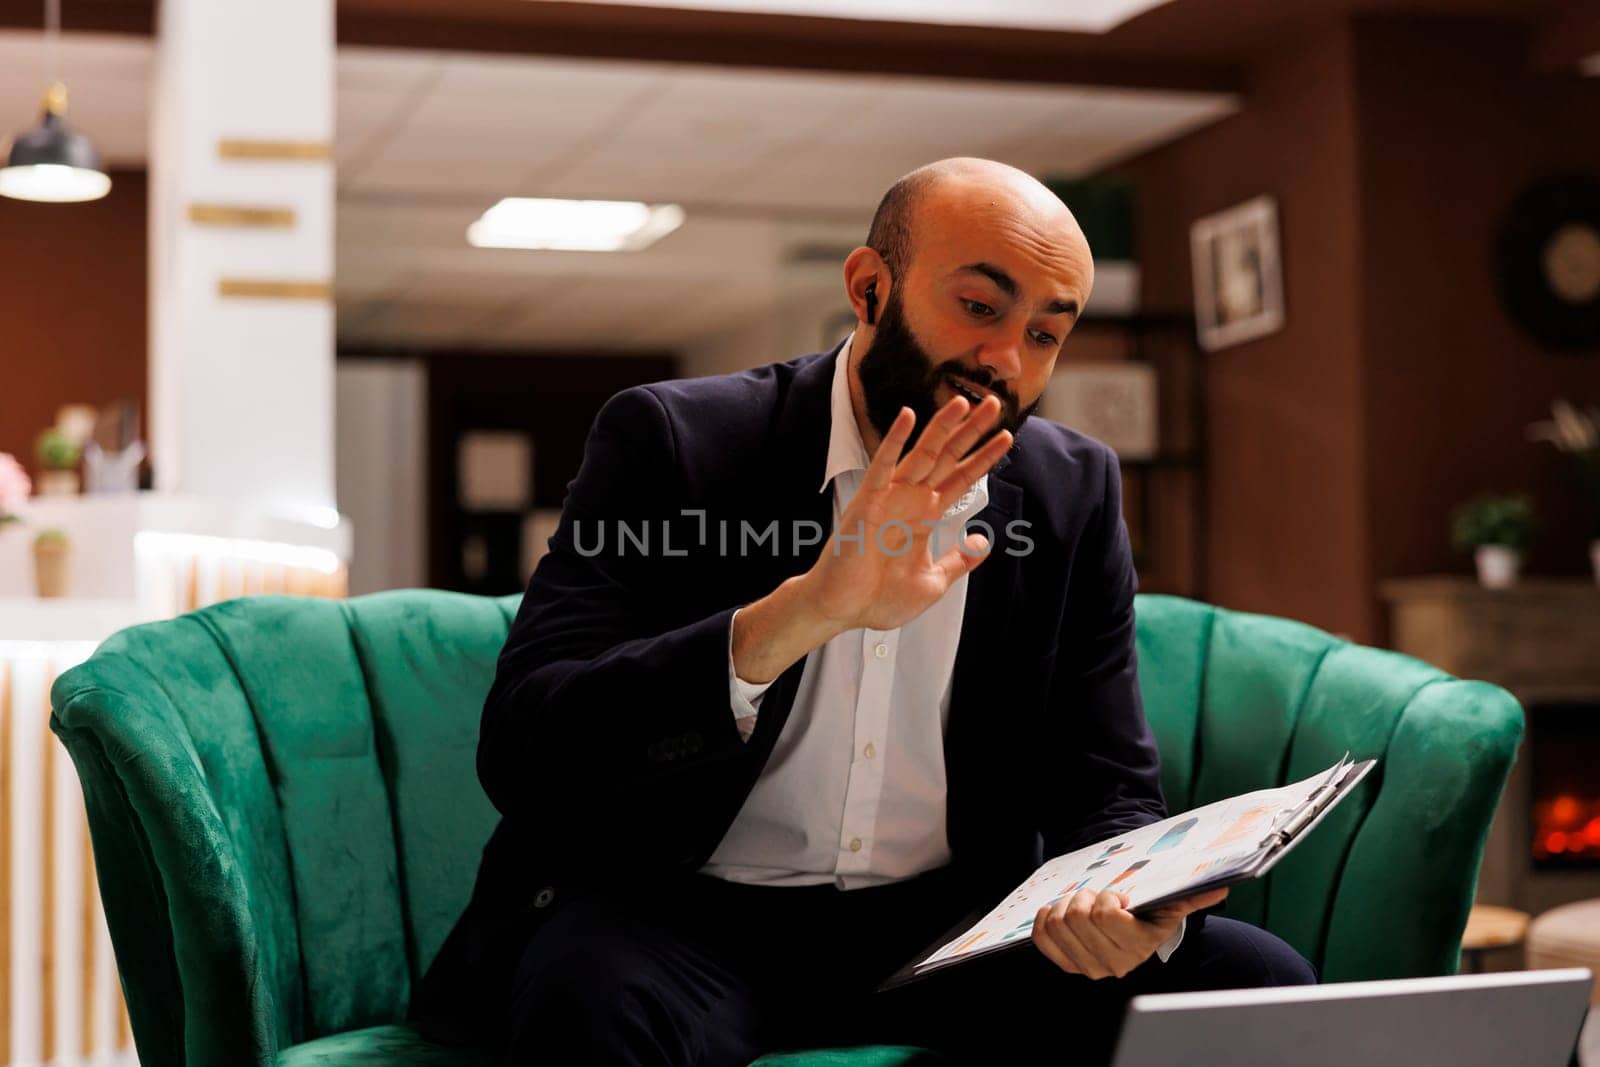 Businessman attends videocall in hotel lobby, killing time while he waits to check in. Entrepreneur in suit using laptop to meet online with manager, videoconference telework in lounge area.